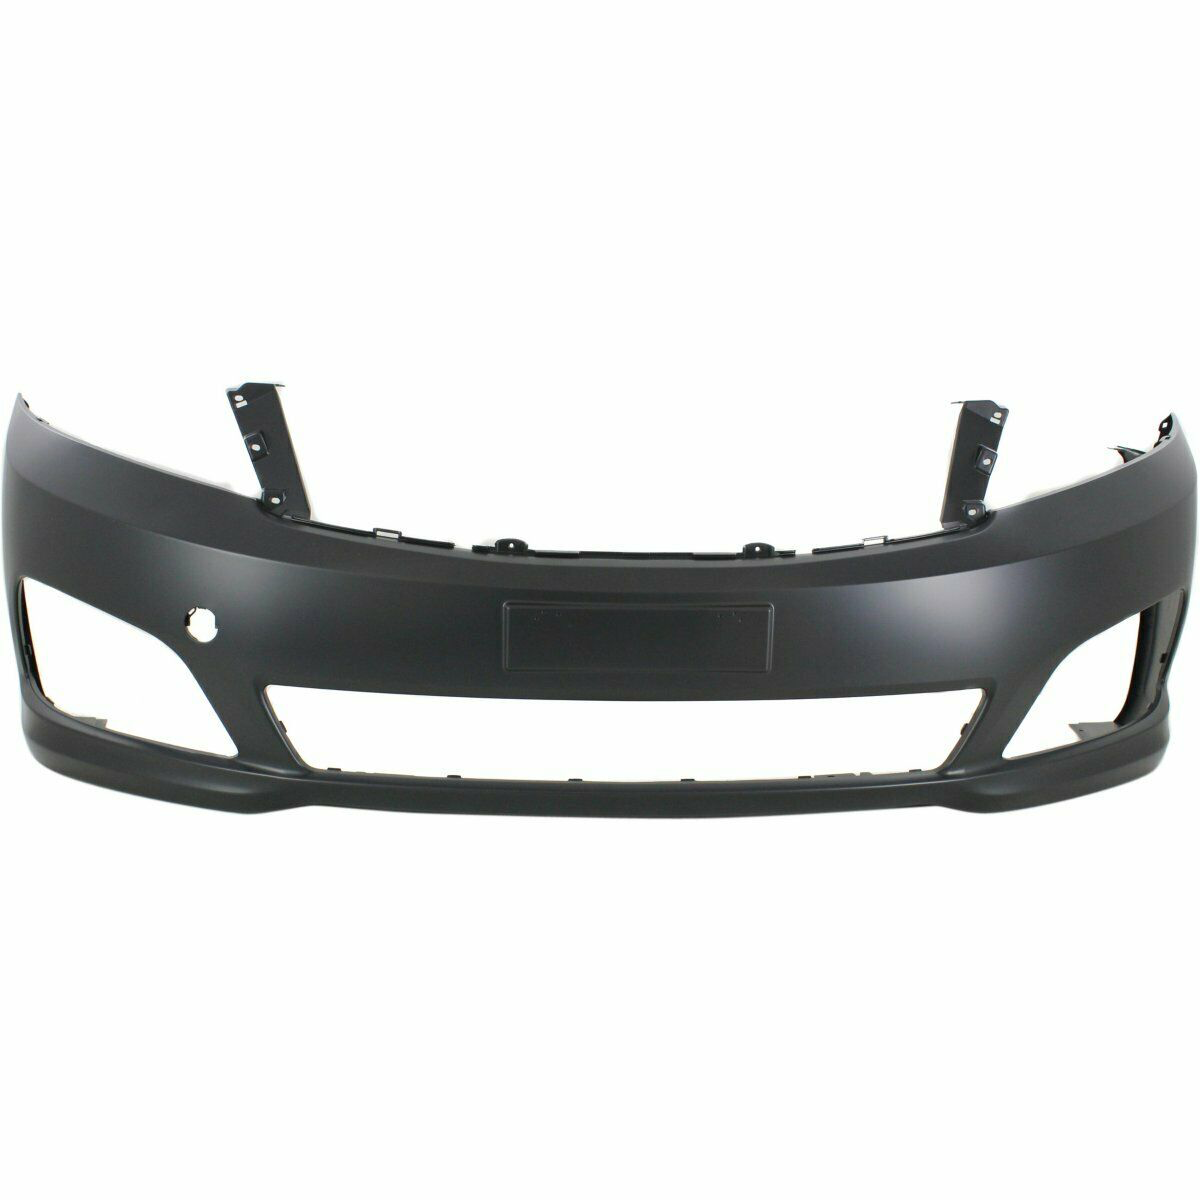 2009-2010 Kia Optima Front Bumper Painted to Match